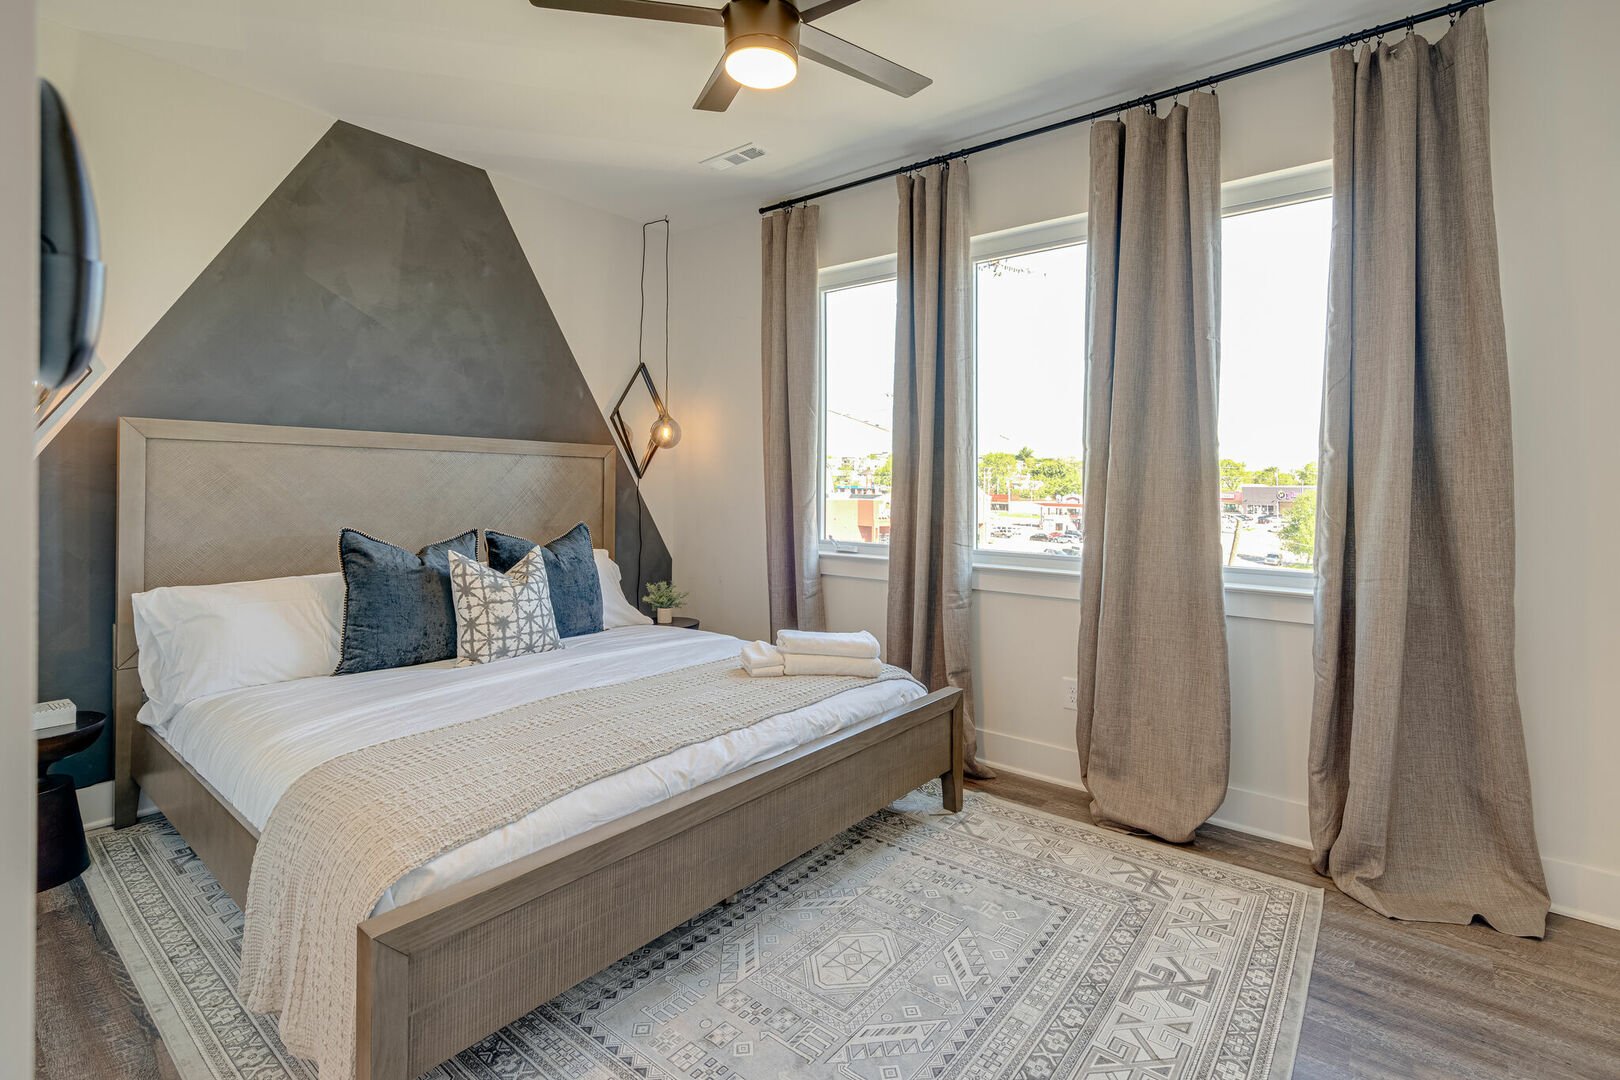 3rd floor: 2nd Bedroom featuring a King bed and designer furnishings with ensuite bathroom.